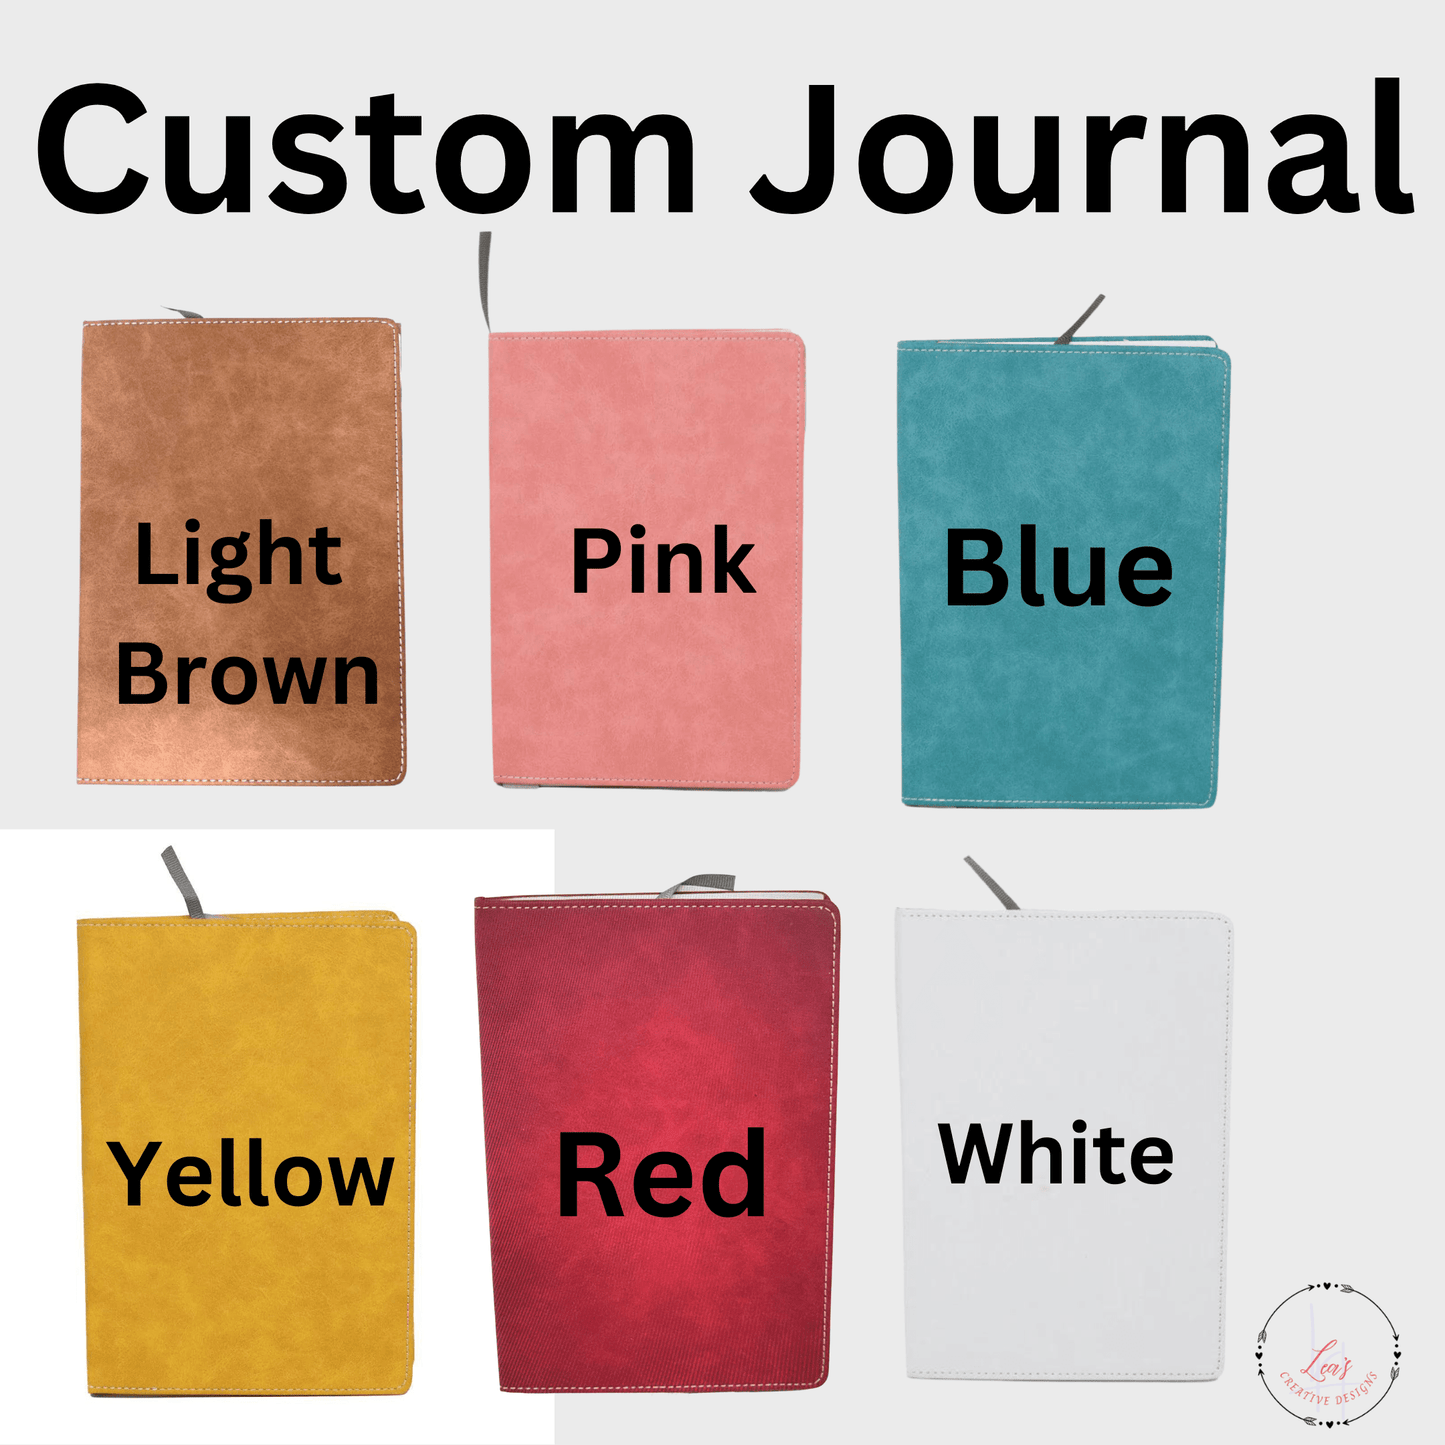 Customize Your Own Journals